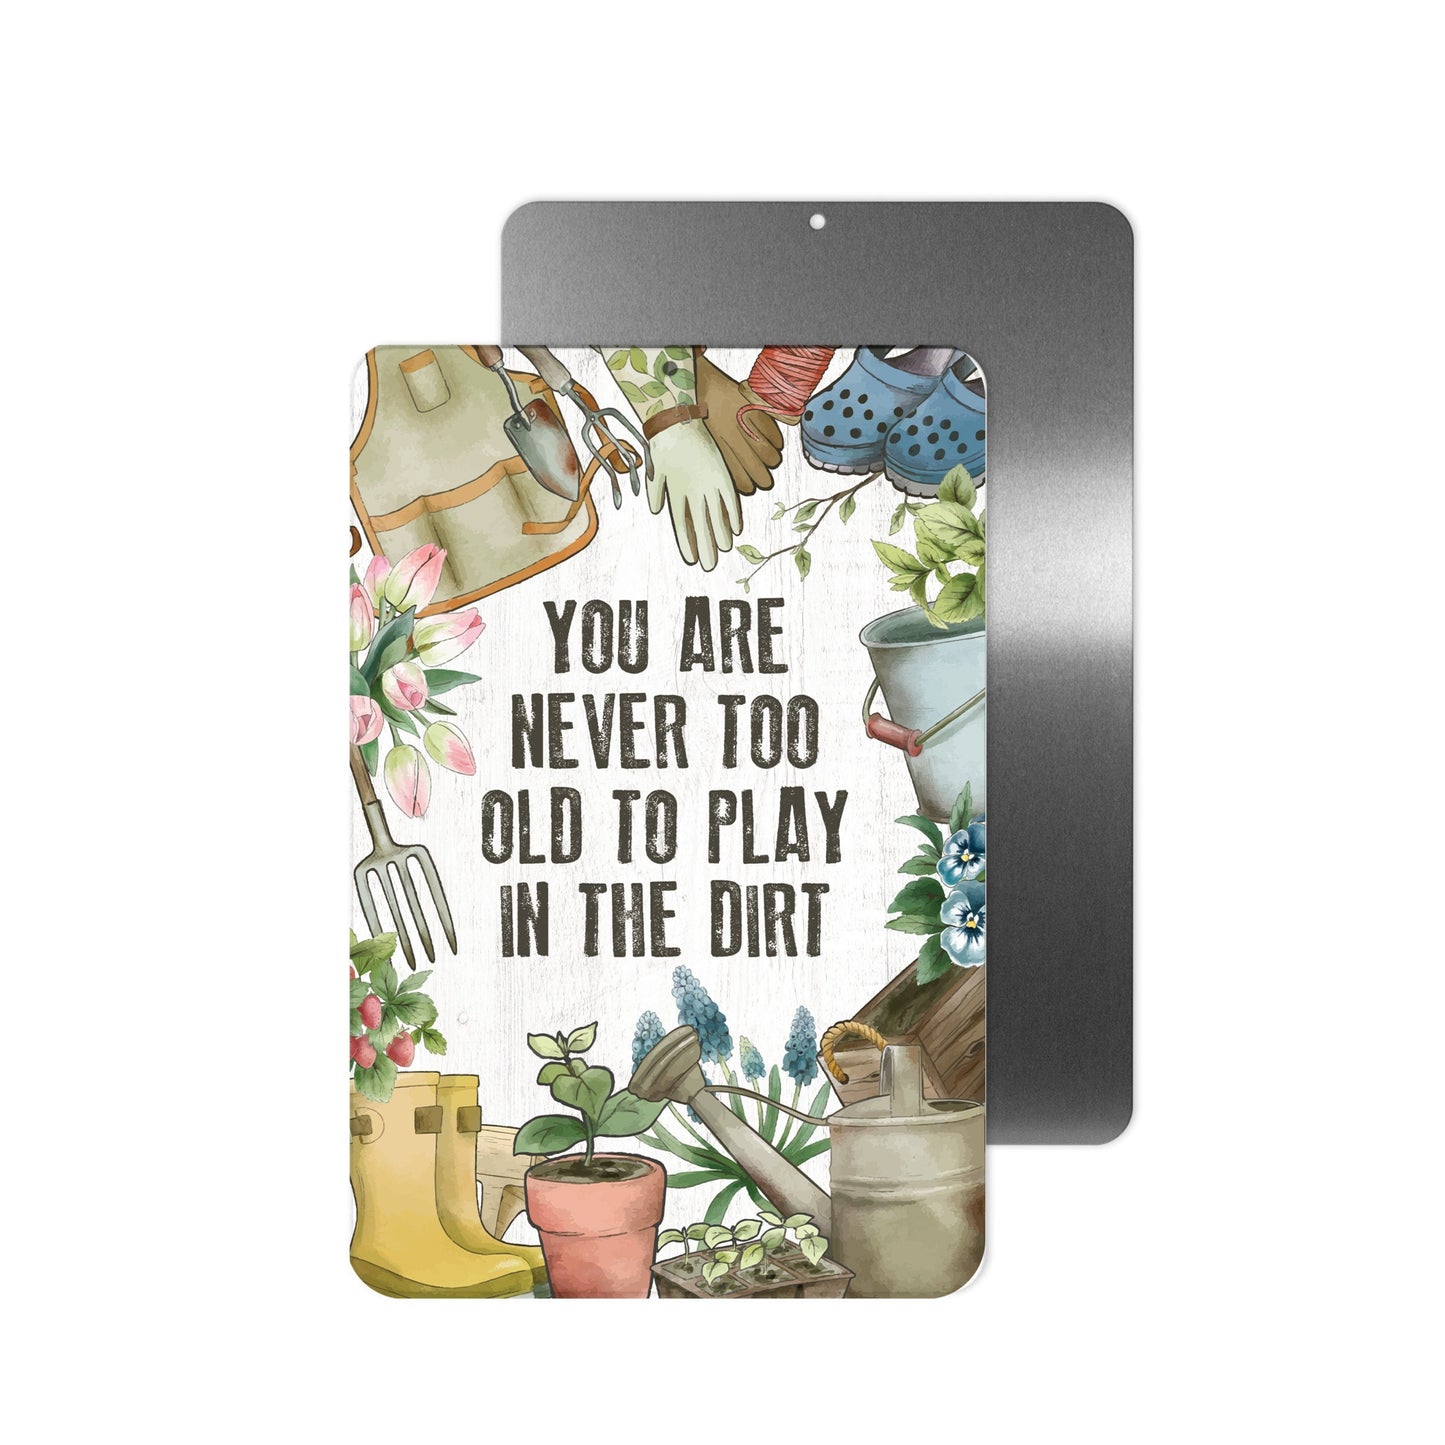 Never Too Old To Play In The Dirt Metal Sign - 8"x12"